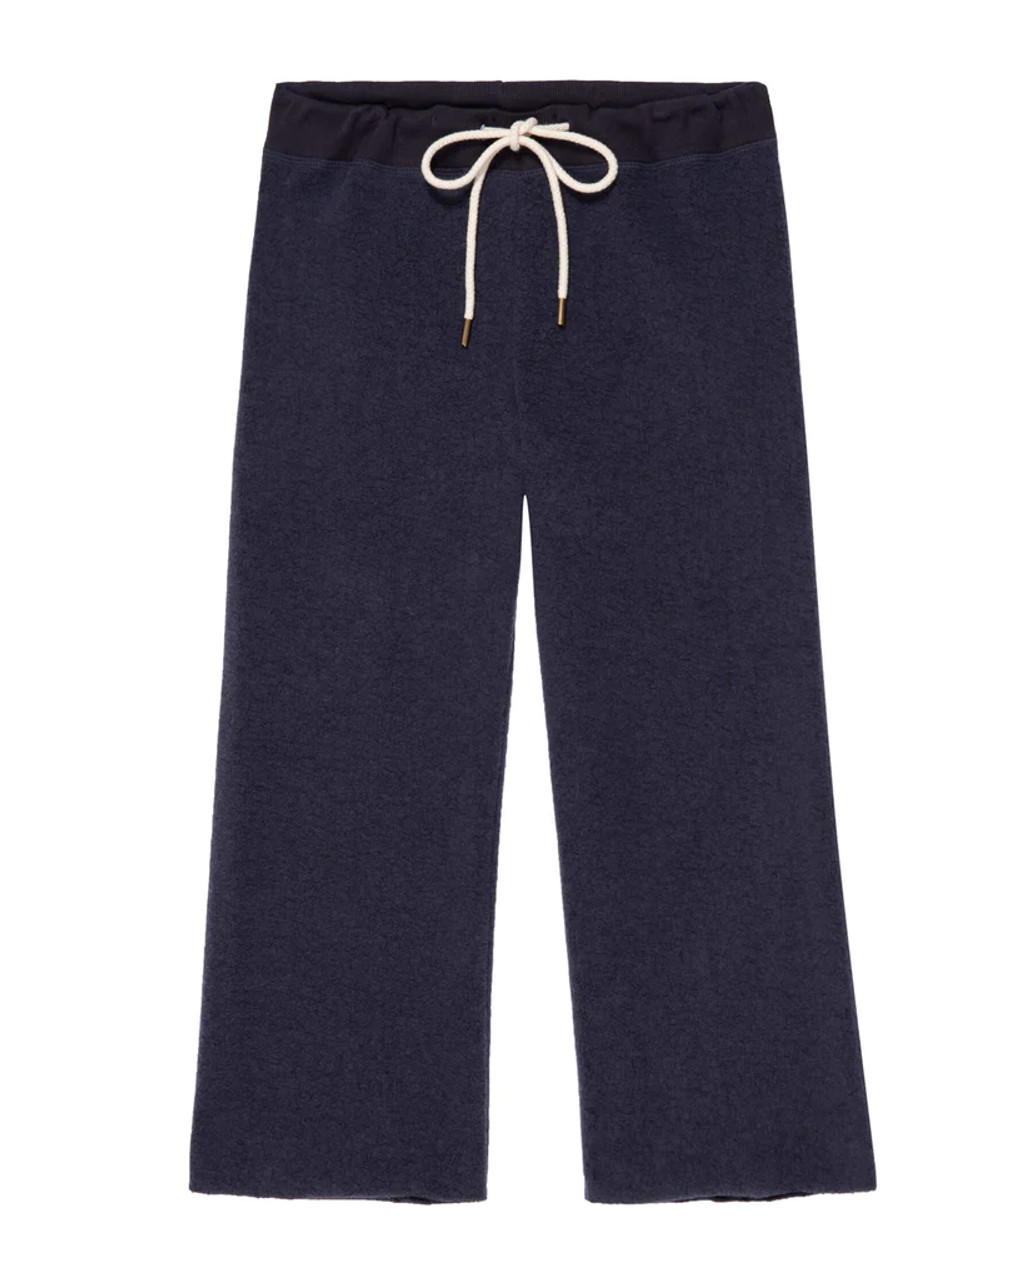 The Wide Leg Cropped Sweatpant.